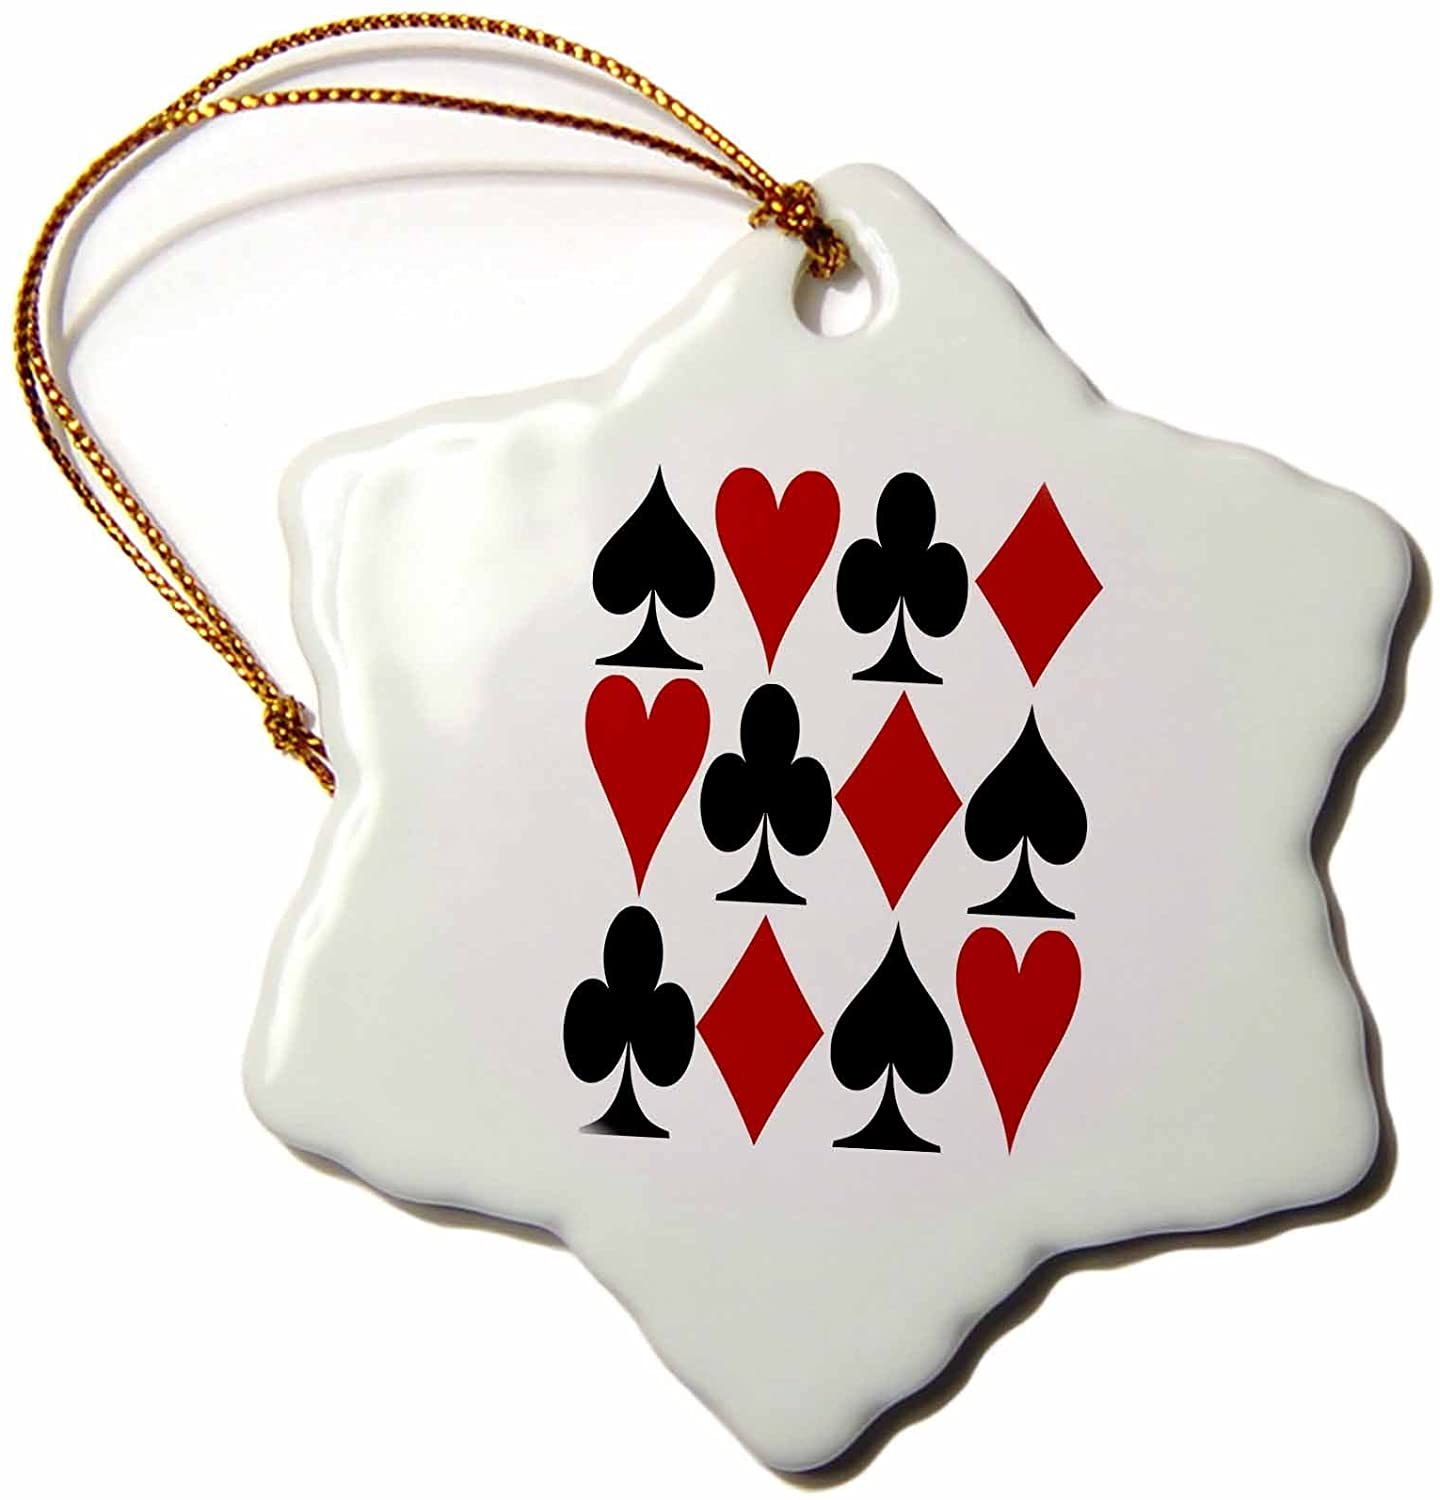 All suits holiday ornament playing cards poker